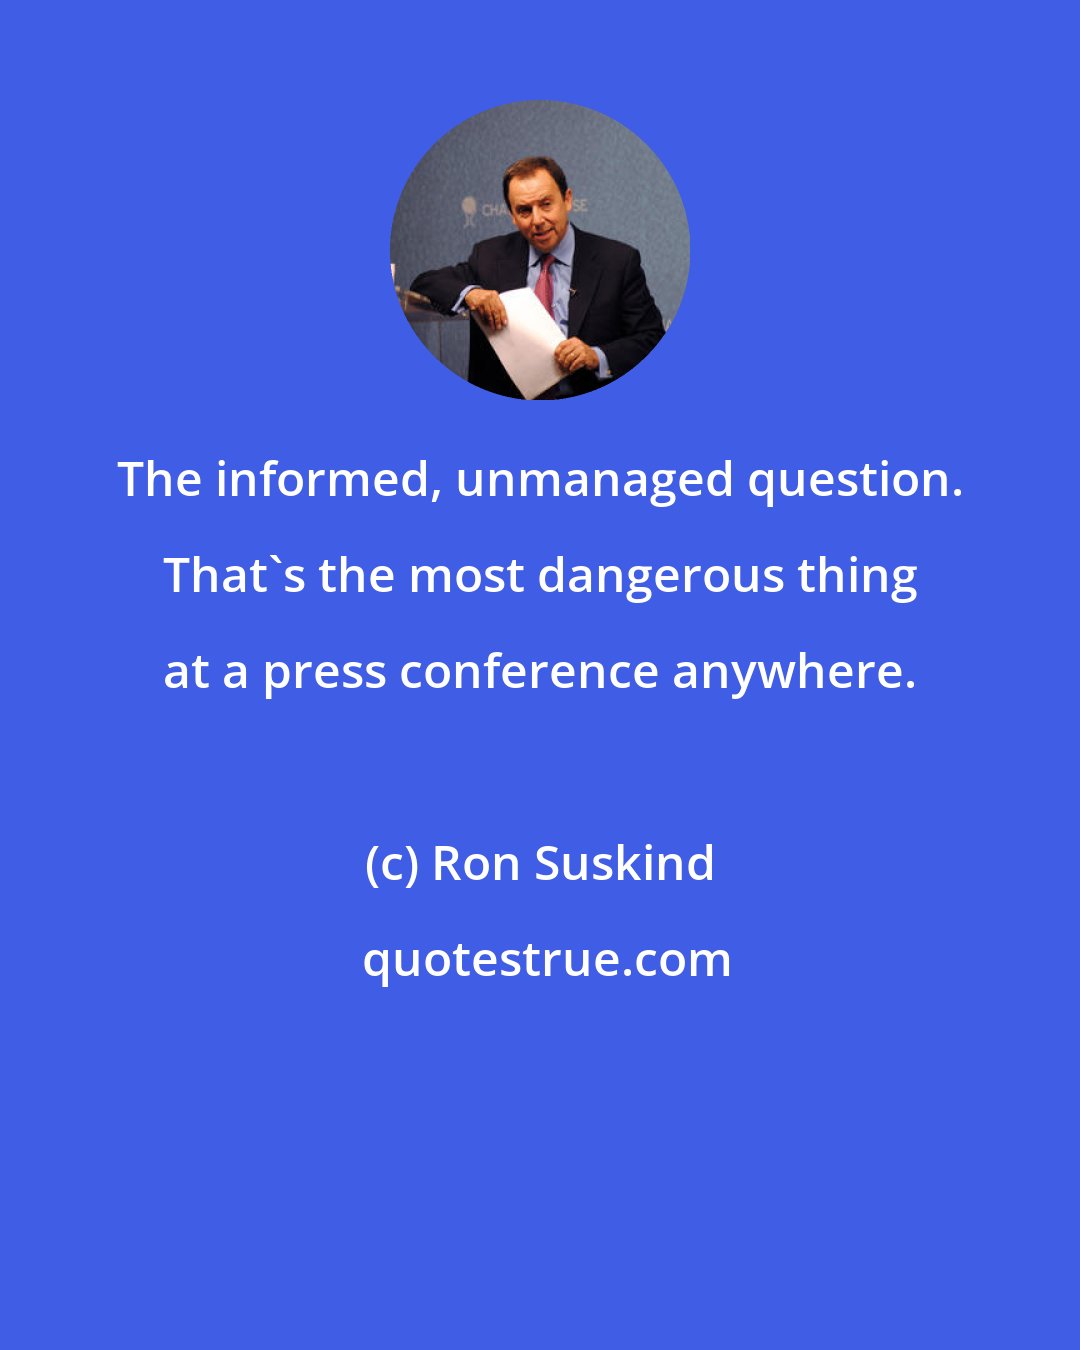 Ron Suskind: The informed, unmanaged question. That's the most dangerous thing at a press conference anywhere.